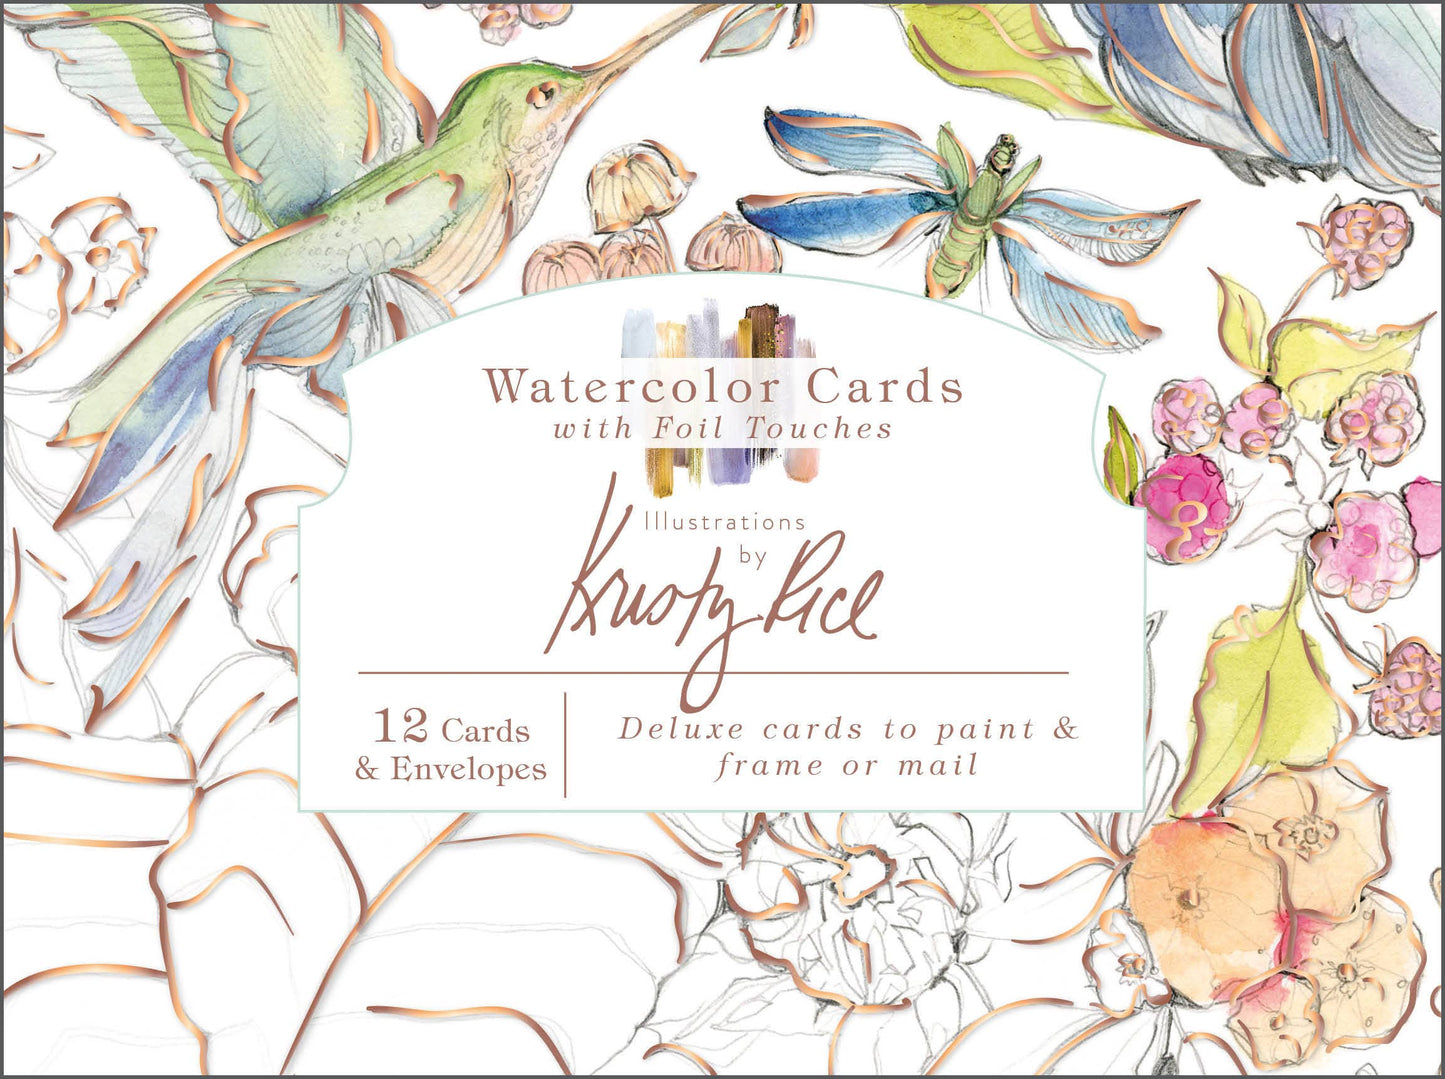 Watercolor Cards with Foil Touches